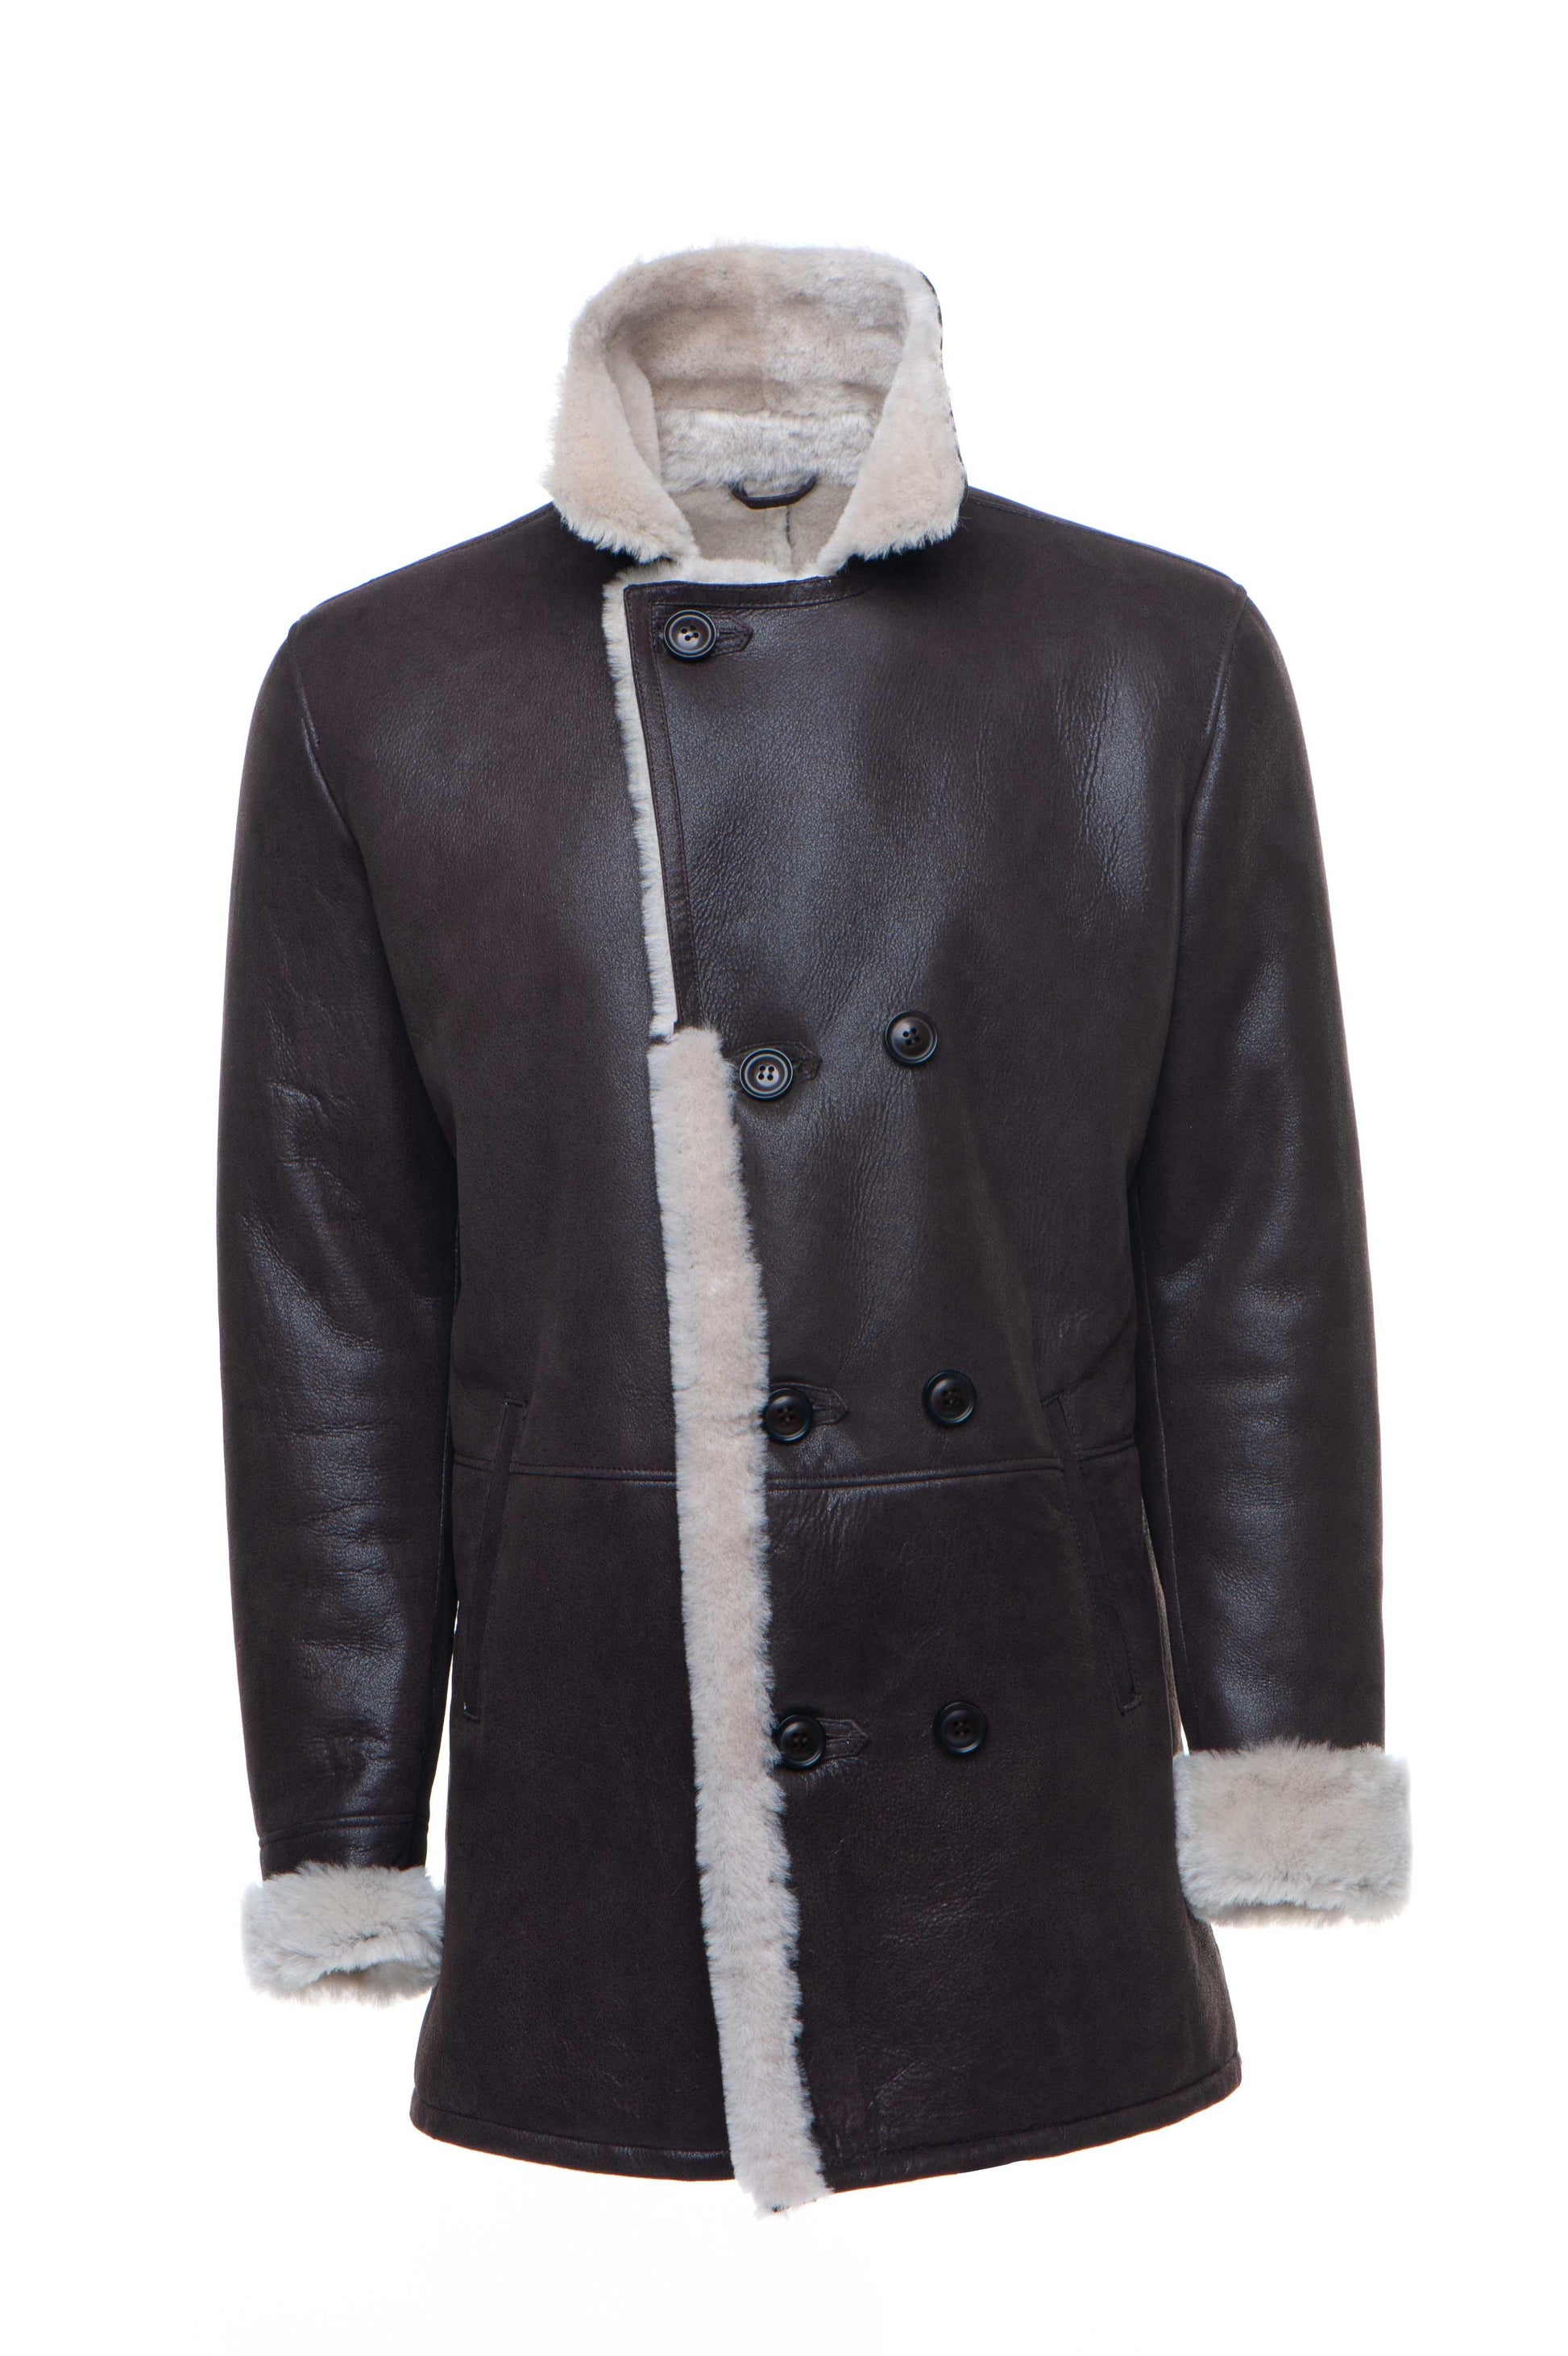 Jozef's 3/4 length brown shearling buttoned coat for Men - Leather Loom